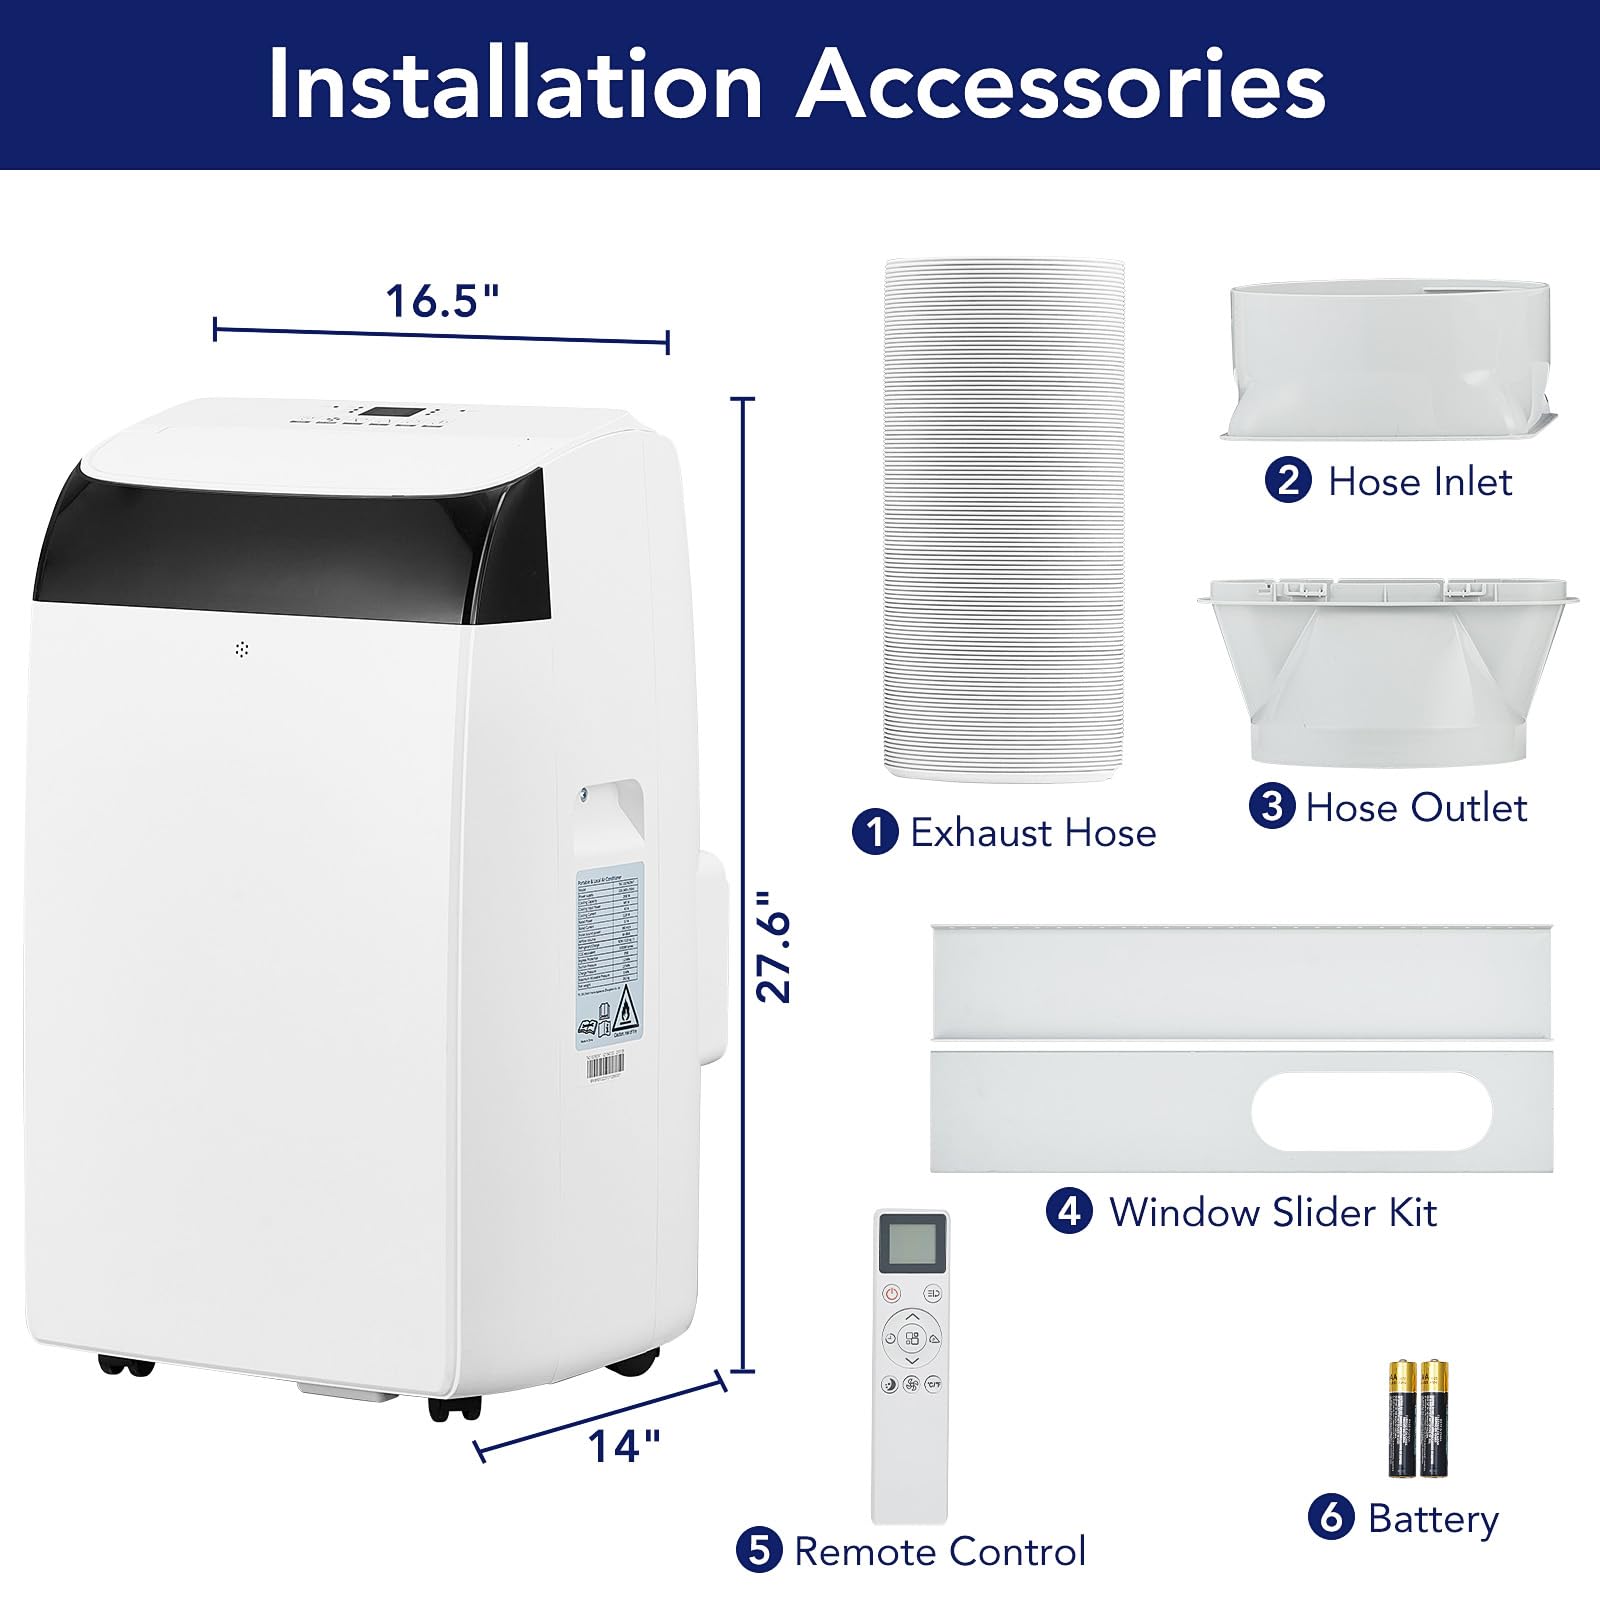 14,000 BTU Portable AC, 550-750 Sq.Ft, 3-in-1, LED, Quiet/Home/Office